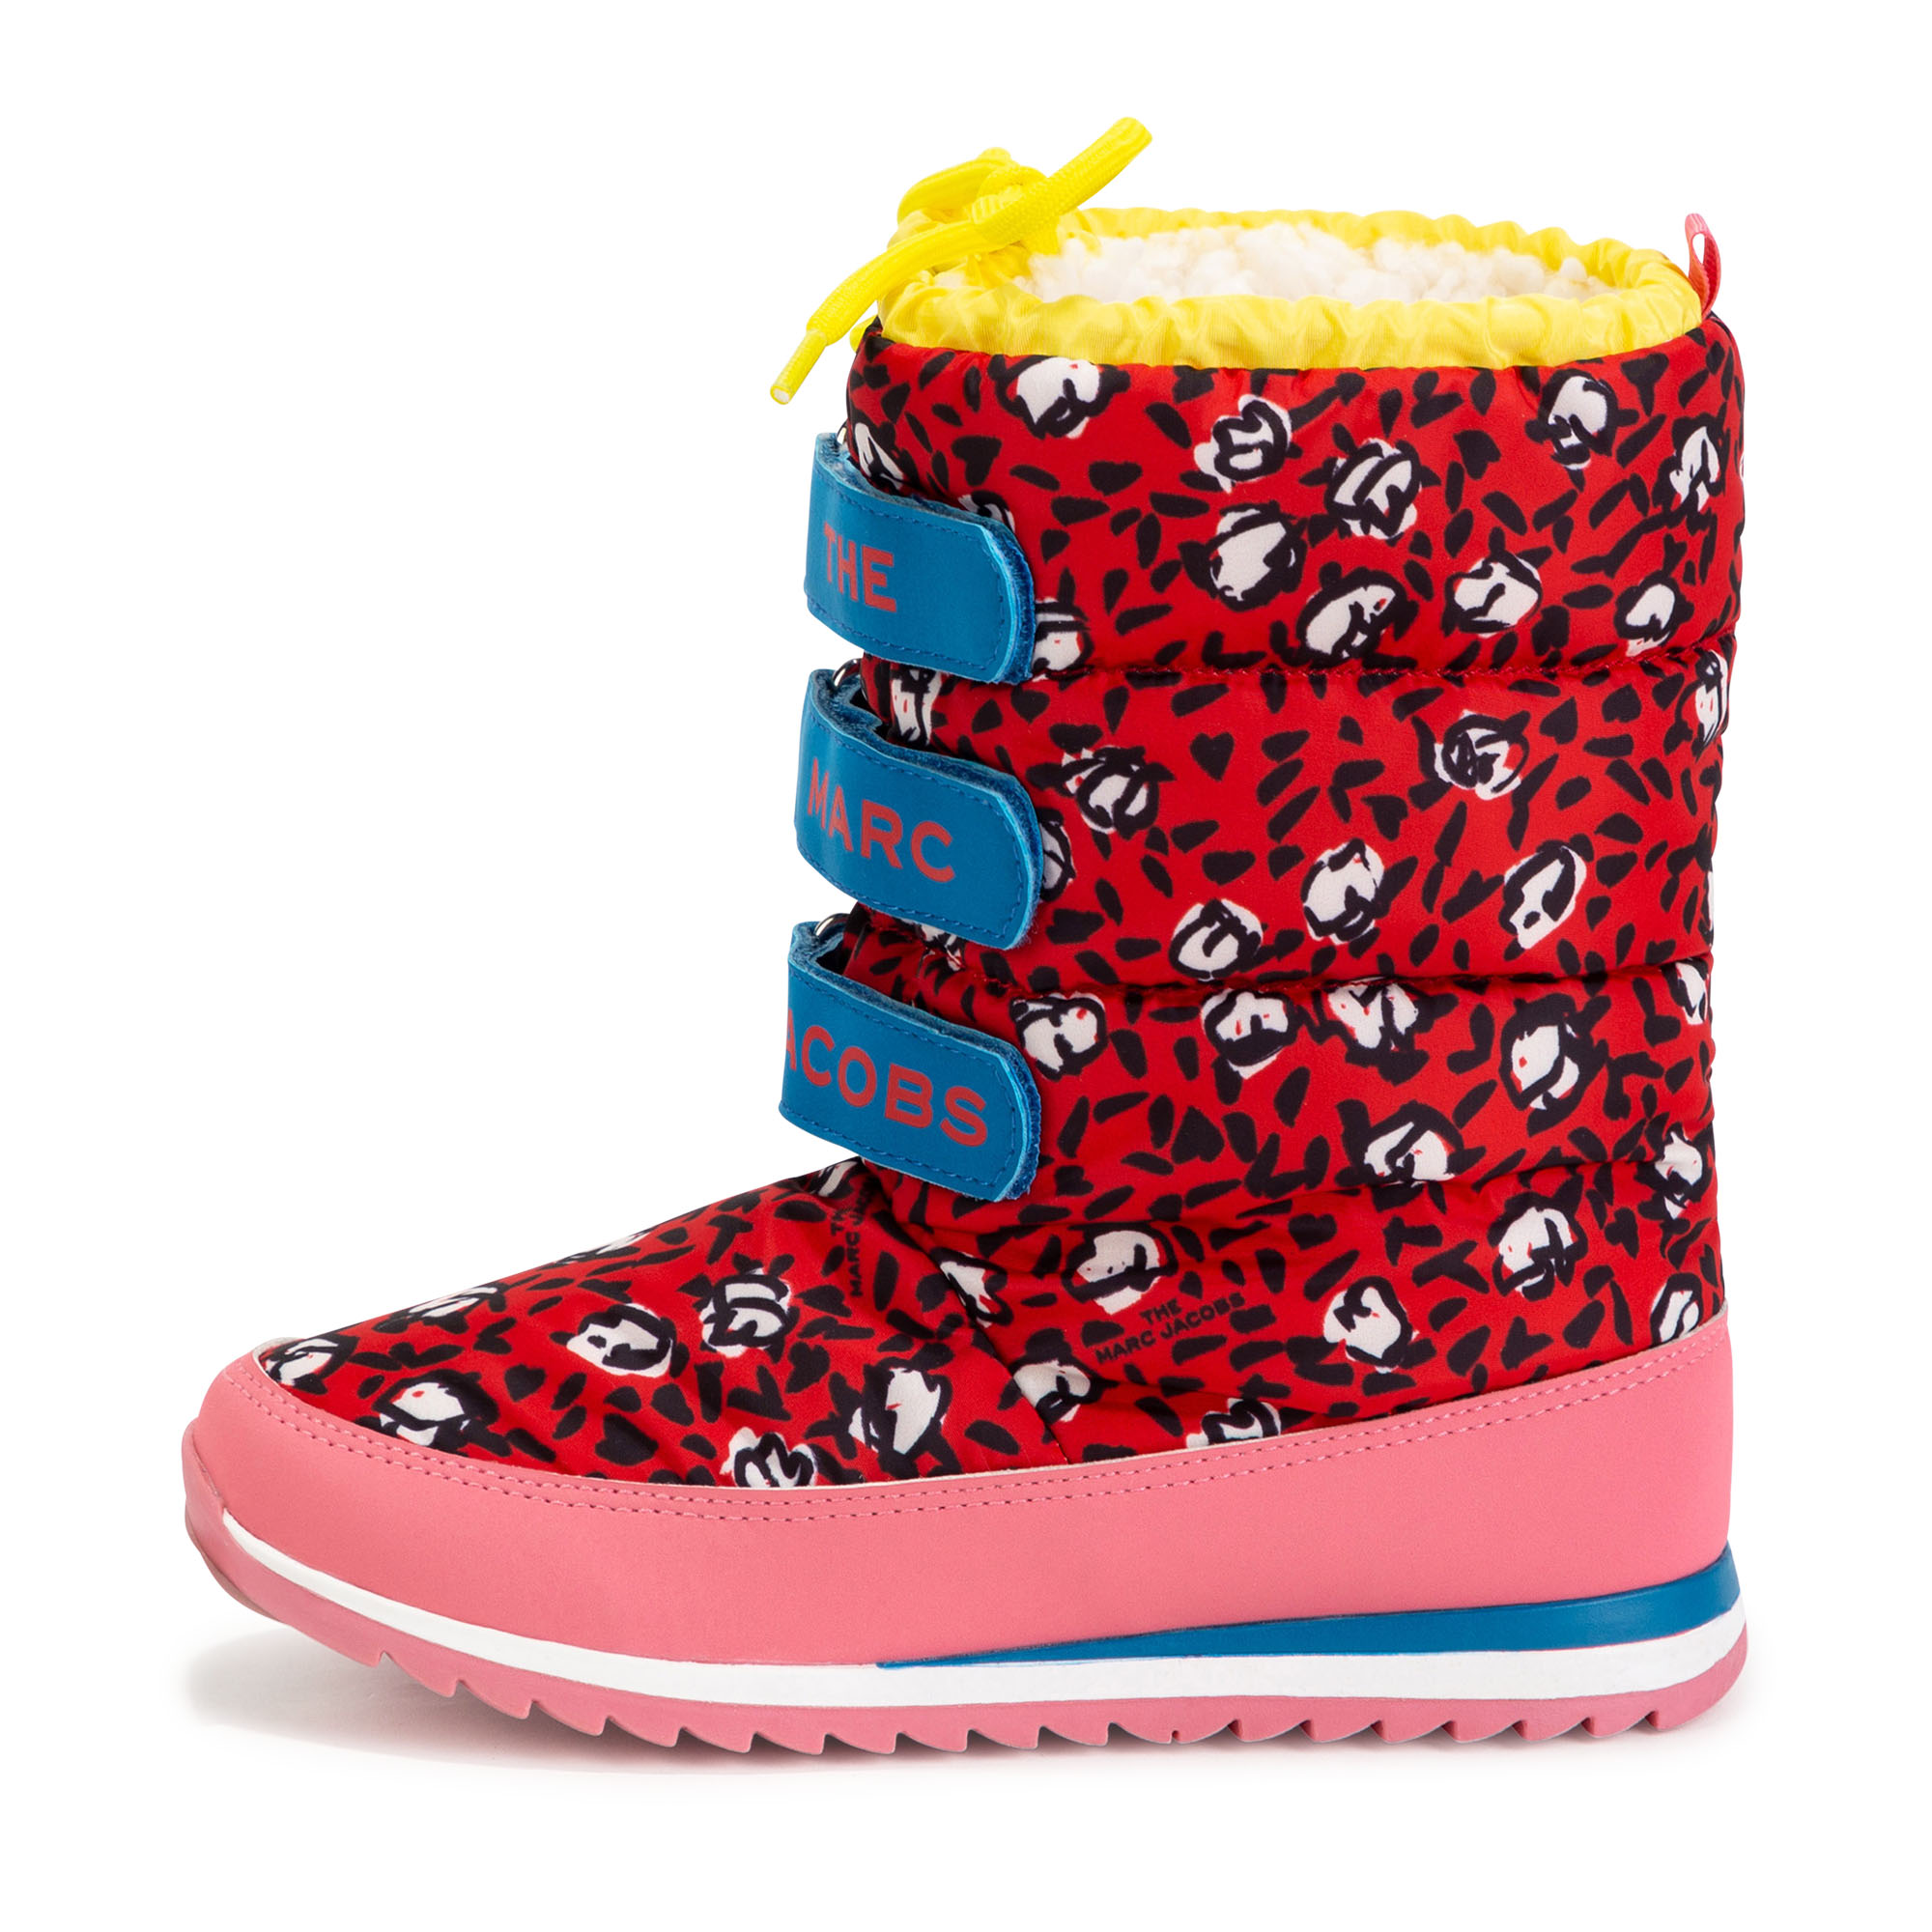 Printed moon boots MARC JACOBS for GIRL